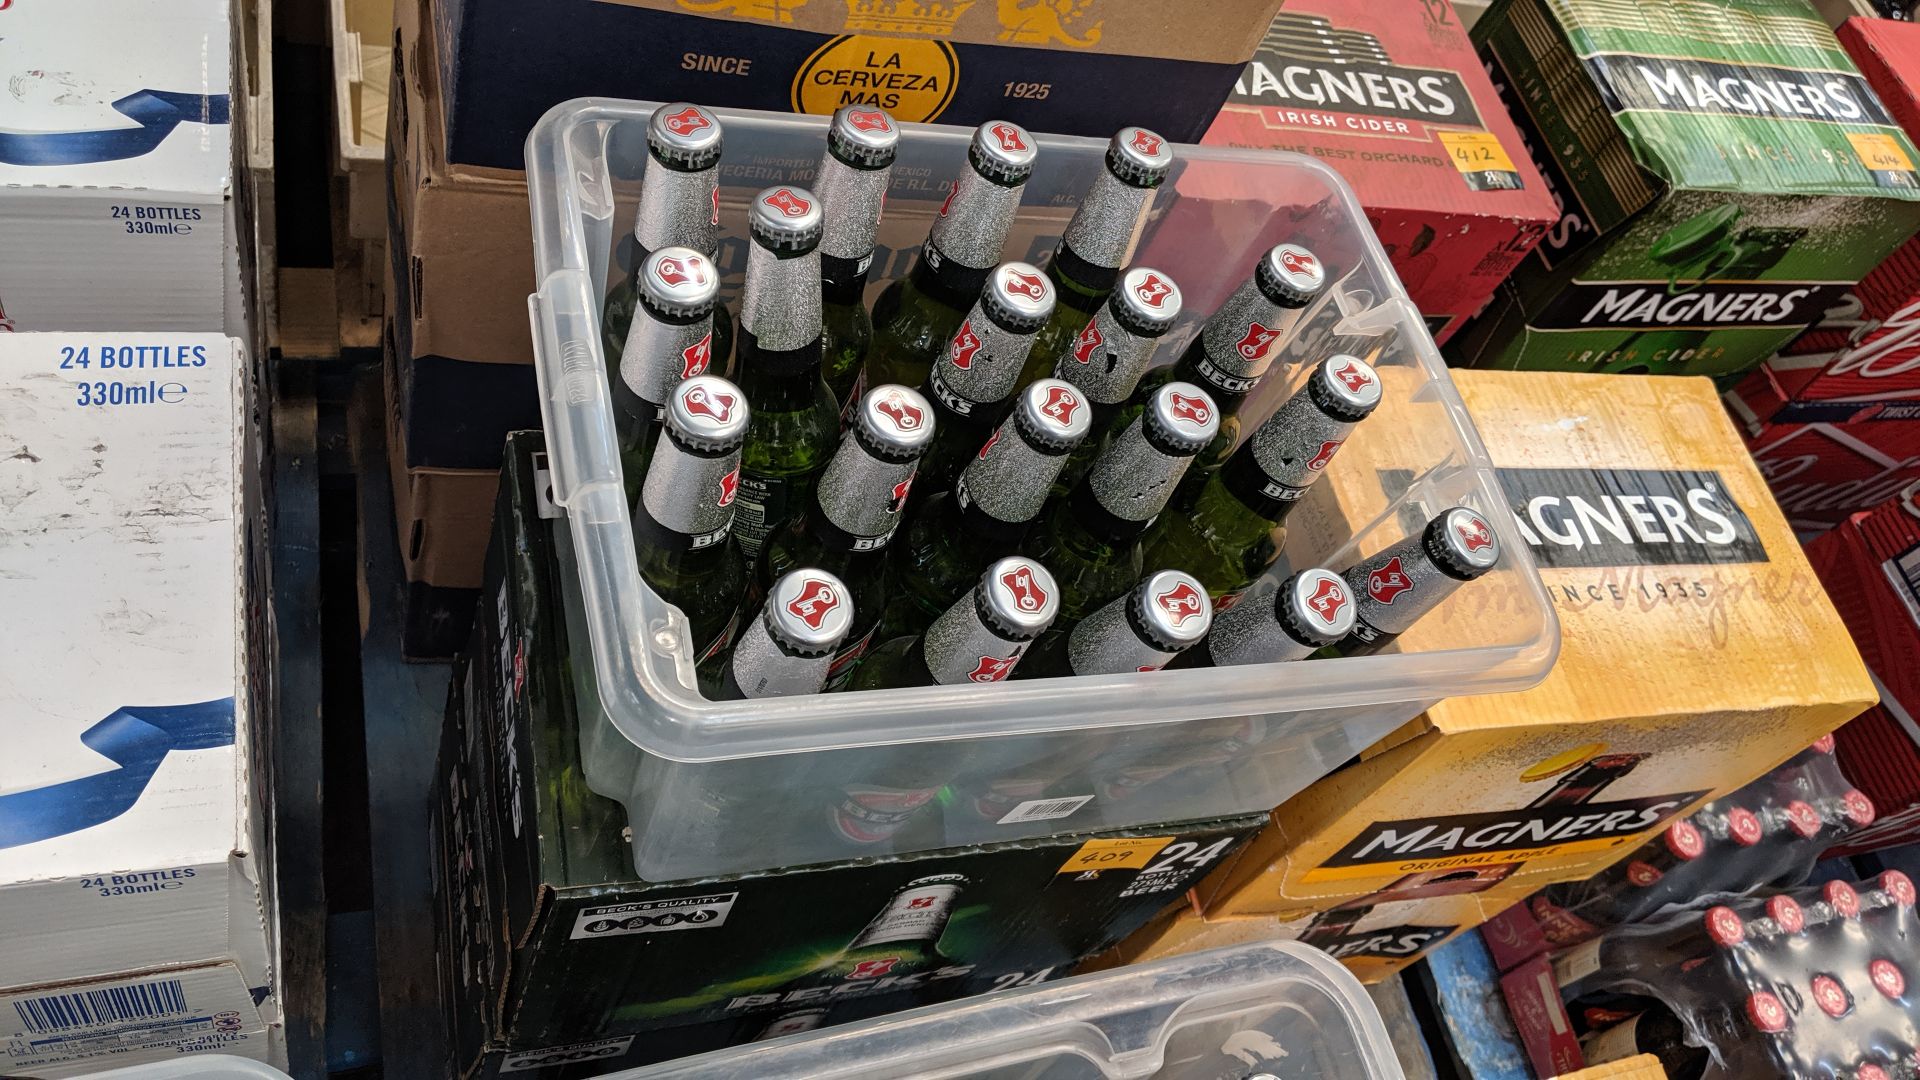 67 off 275ml bottles of Becks beer sold under AWRS number XQAW00000101017. NB plastic crate excluded